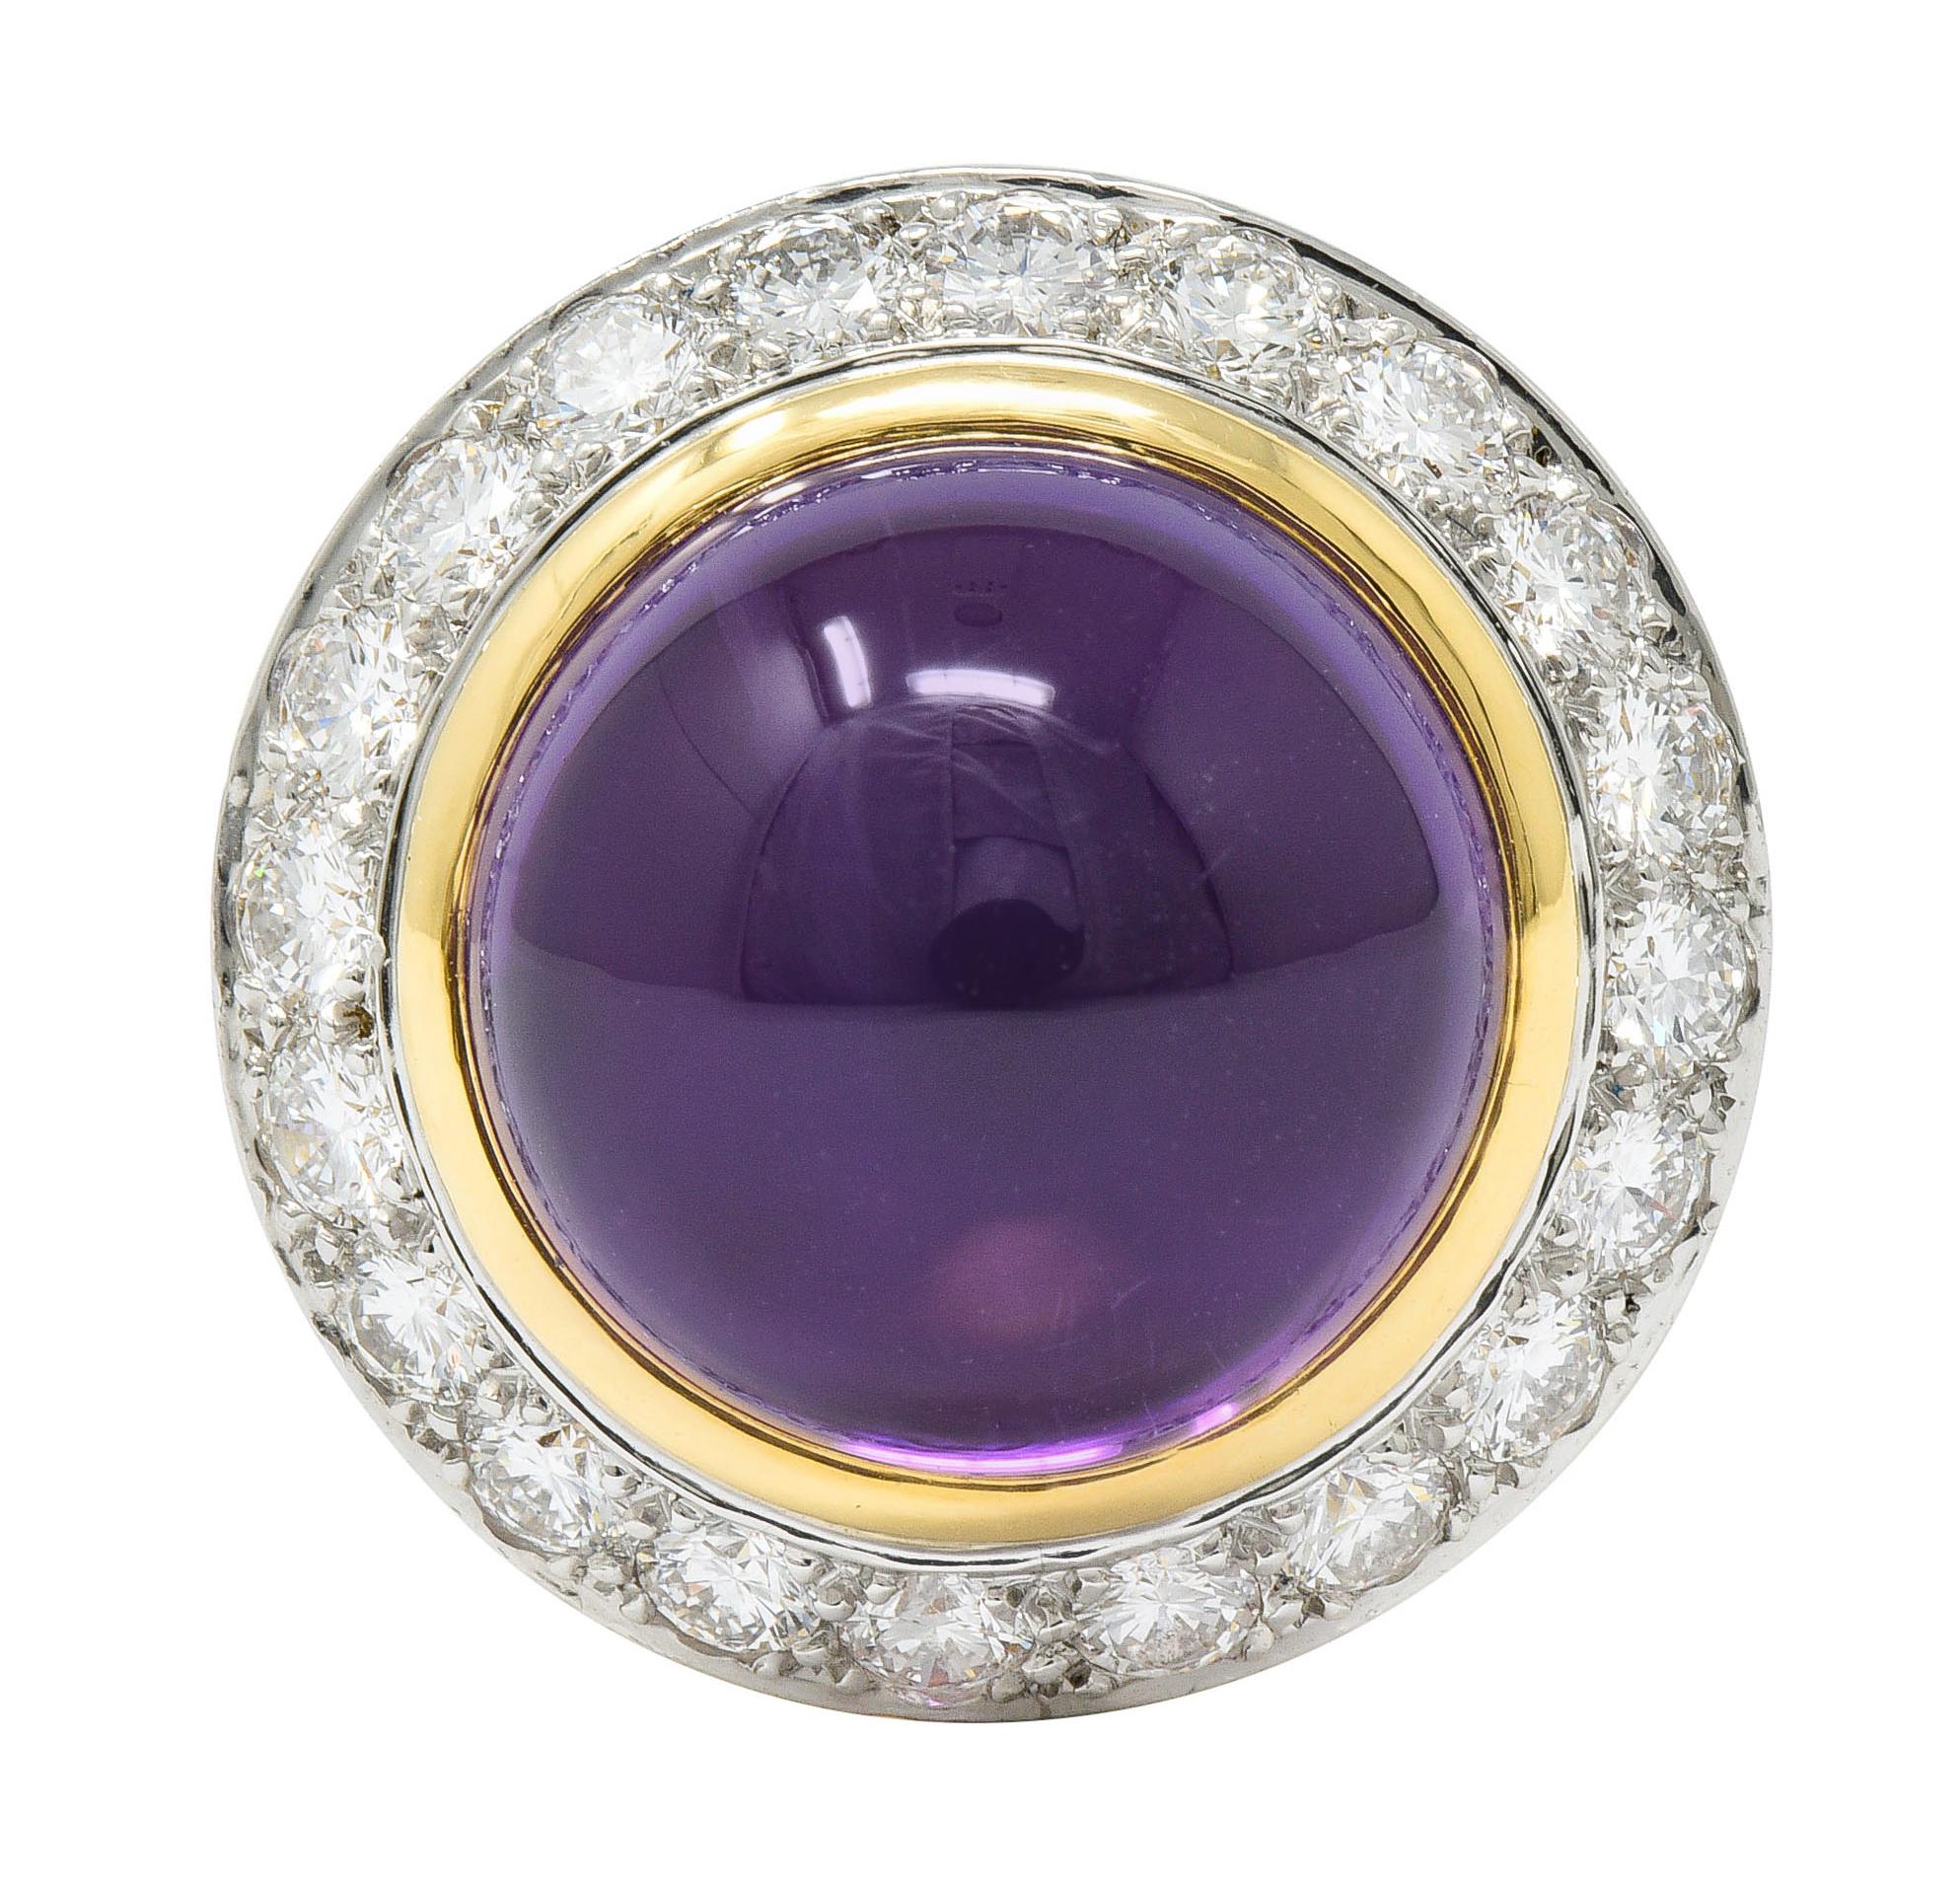 Centering a 14.0 mm round amethyst cabochon; transparent with robust purple color

Surrounded by a halo of round brilliant cut diamonds, bead set in white gold

Total diamond weight is approximately 1.60 carats with F/G color and VS clarity

Tested